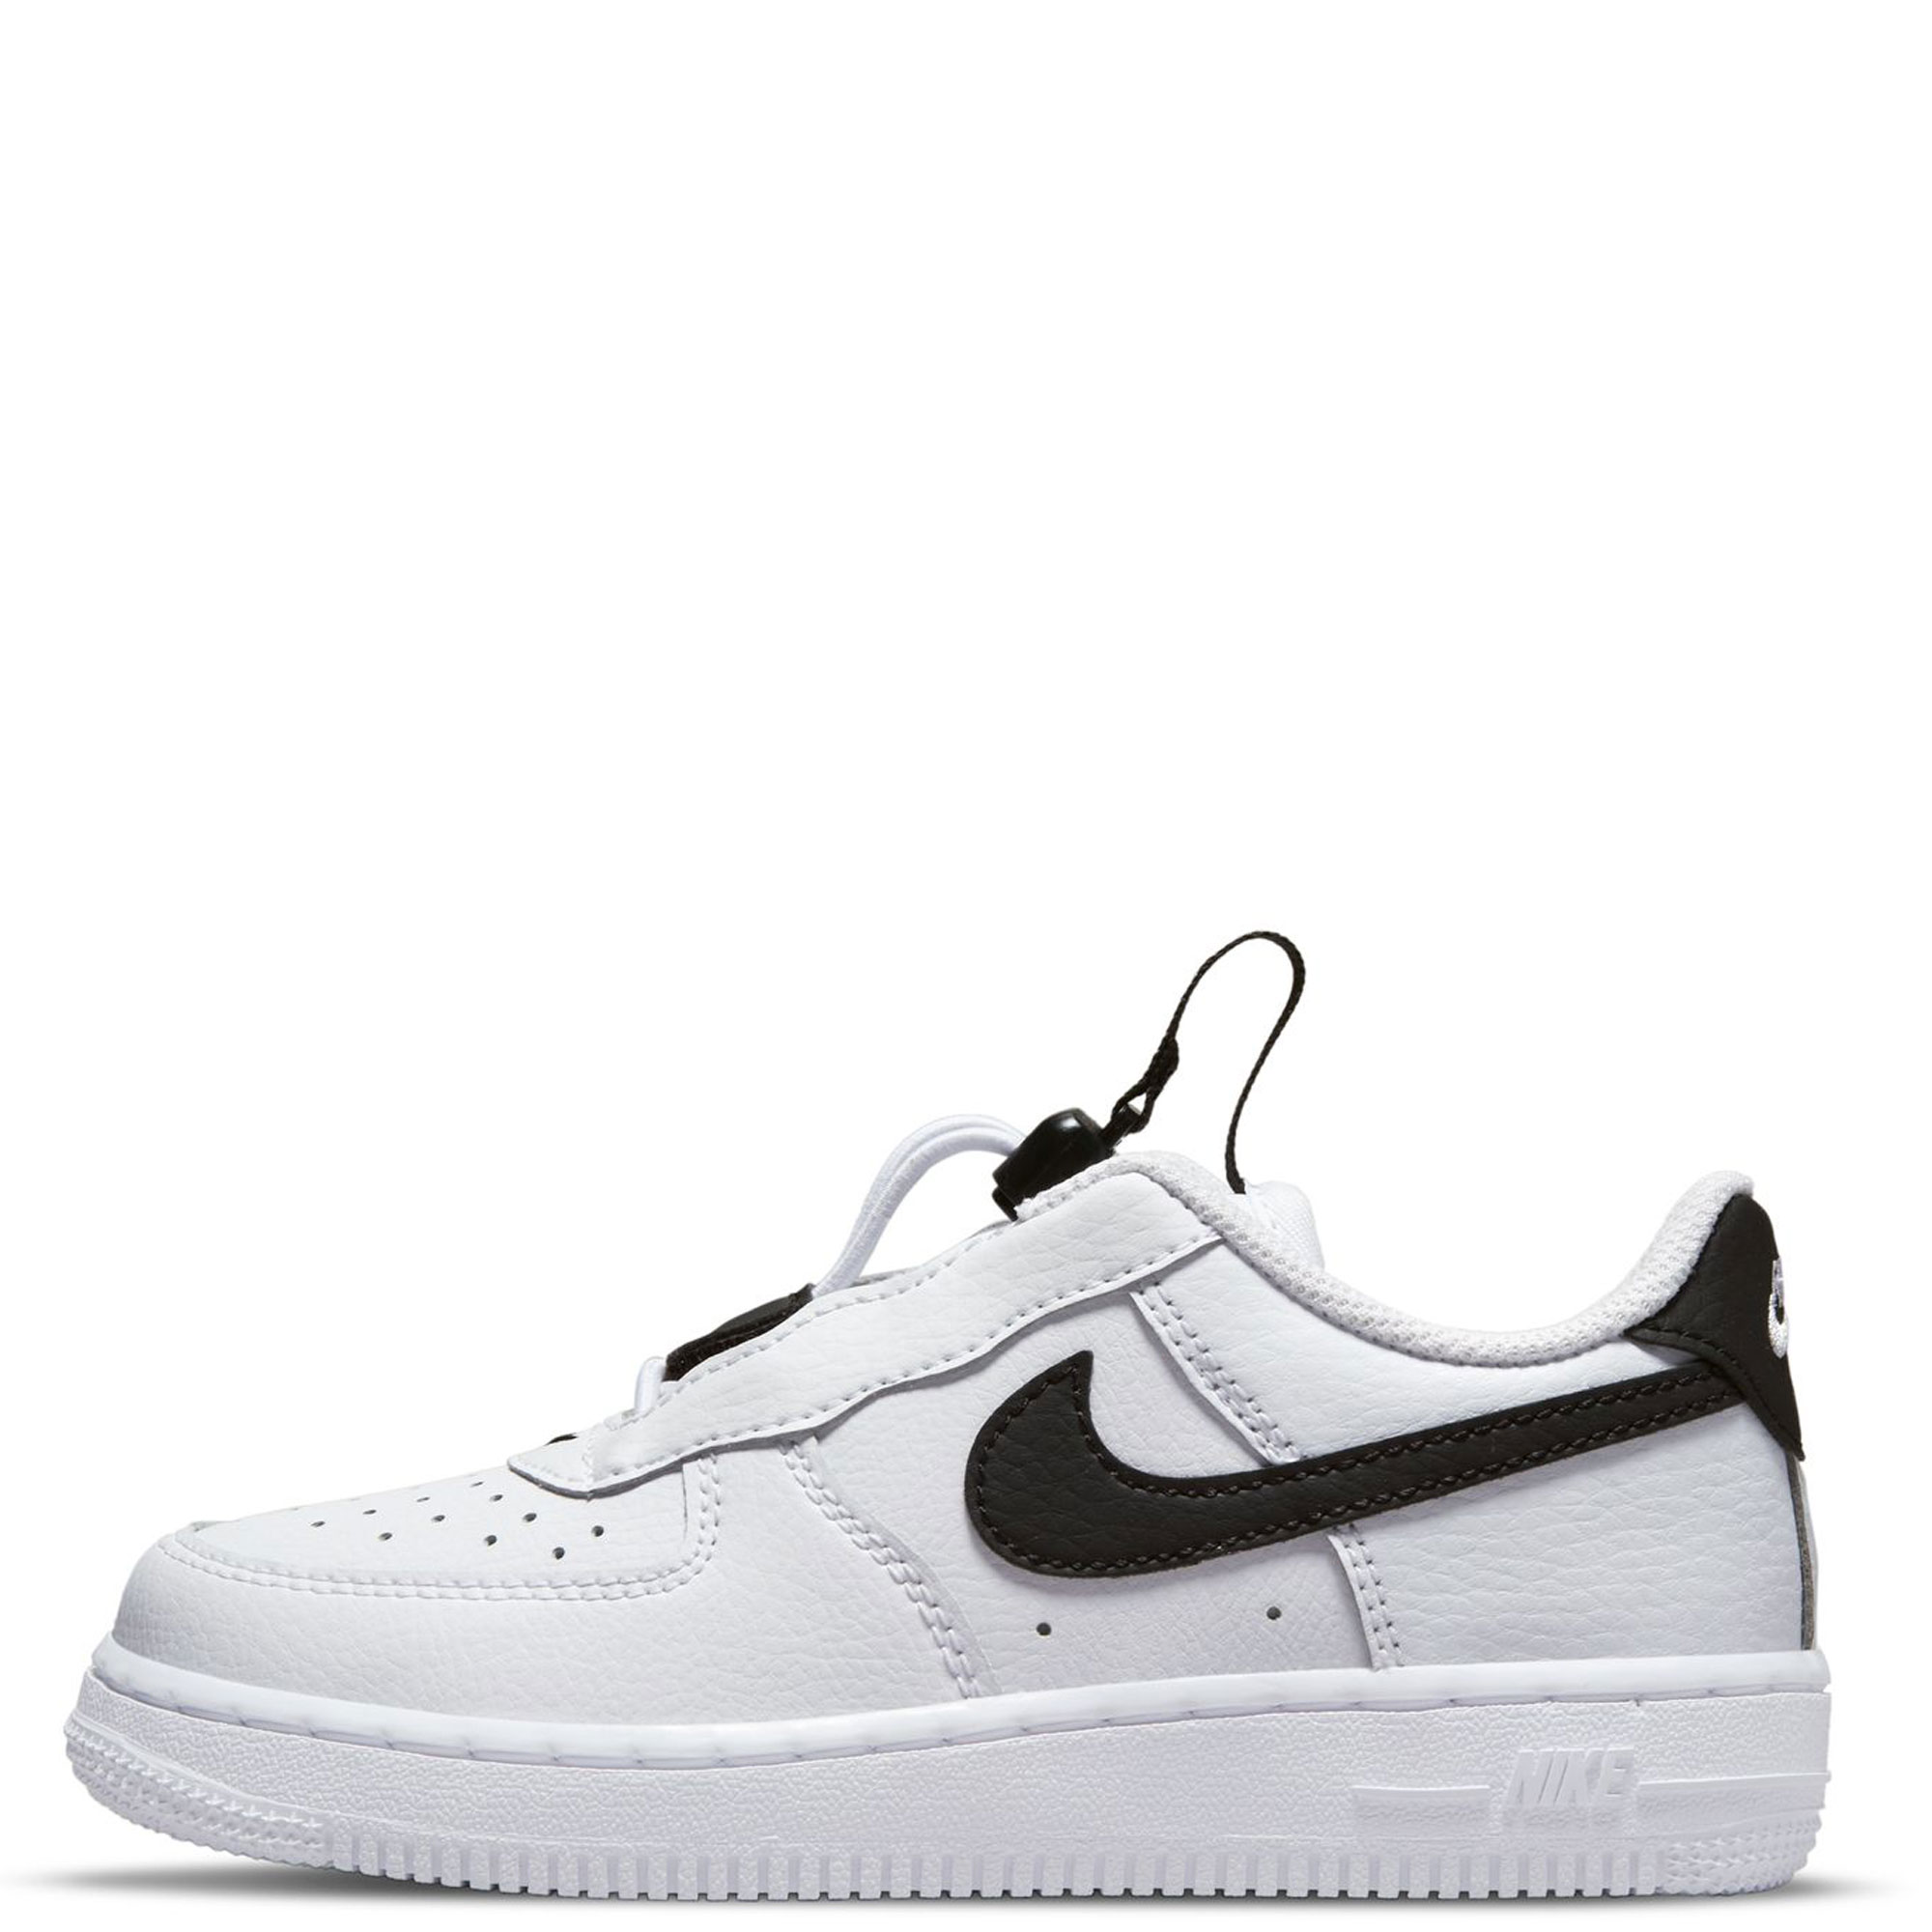 Nike Air Force 1 Low Utility PS by Nike of (White color) for only